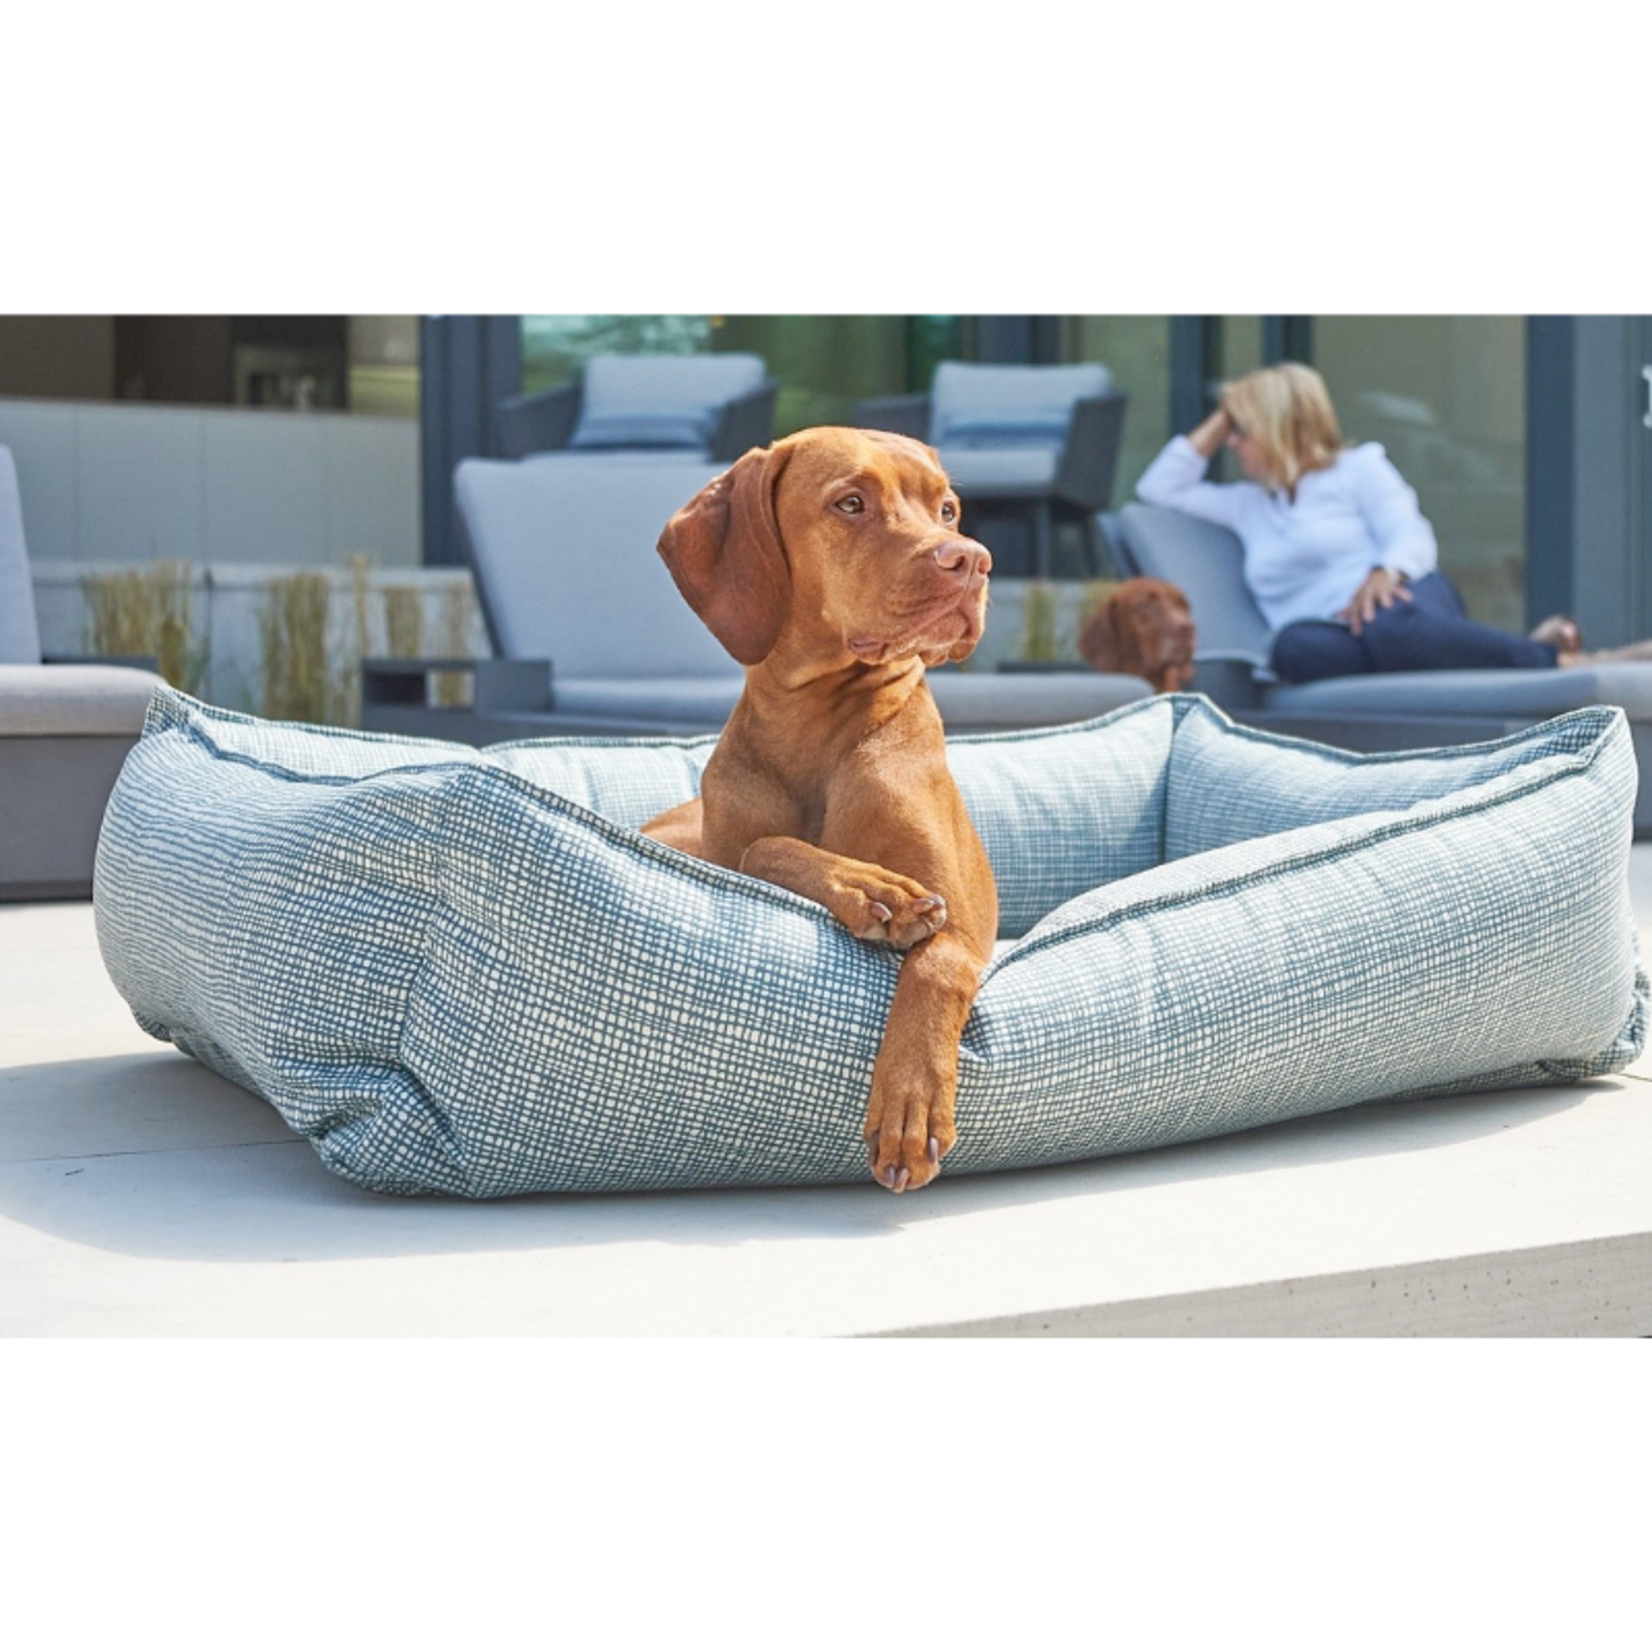 Bowsers Pet Products Urban Lounger Bed - Bowsers Pet Products